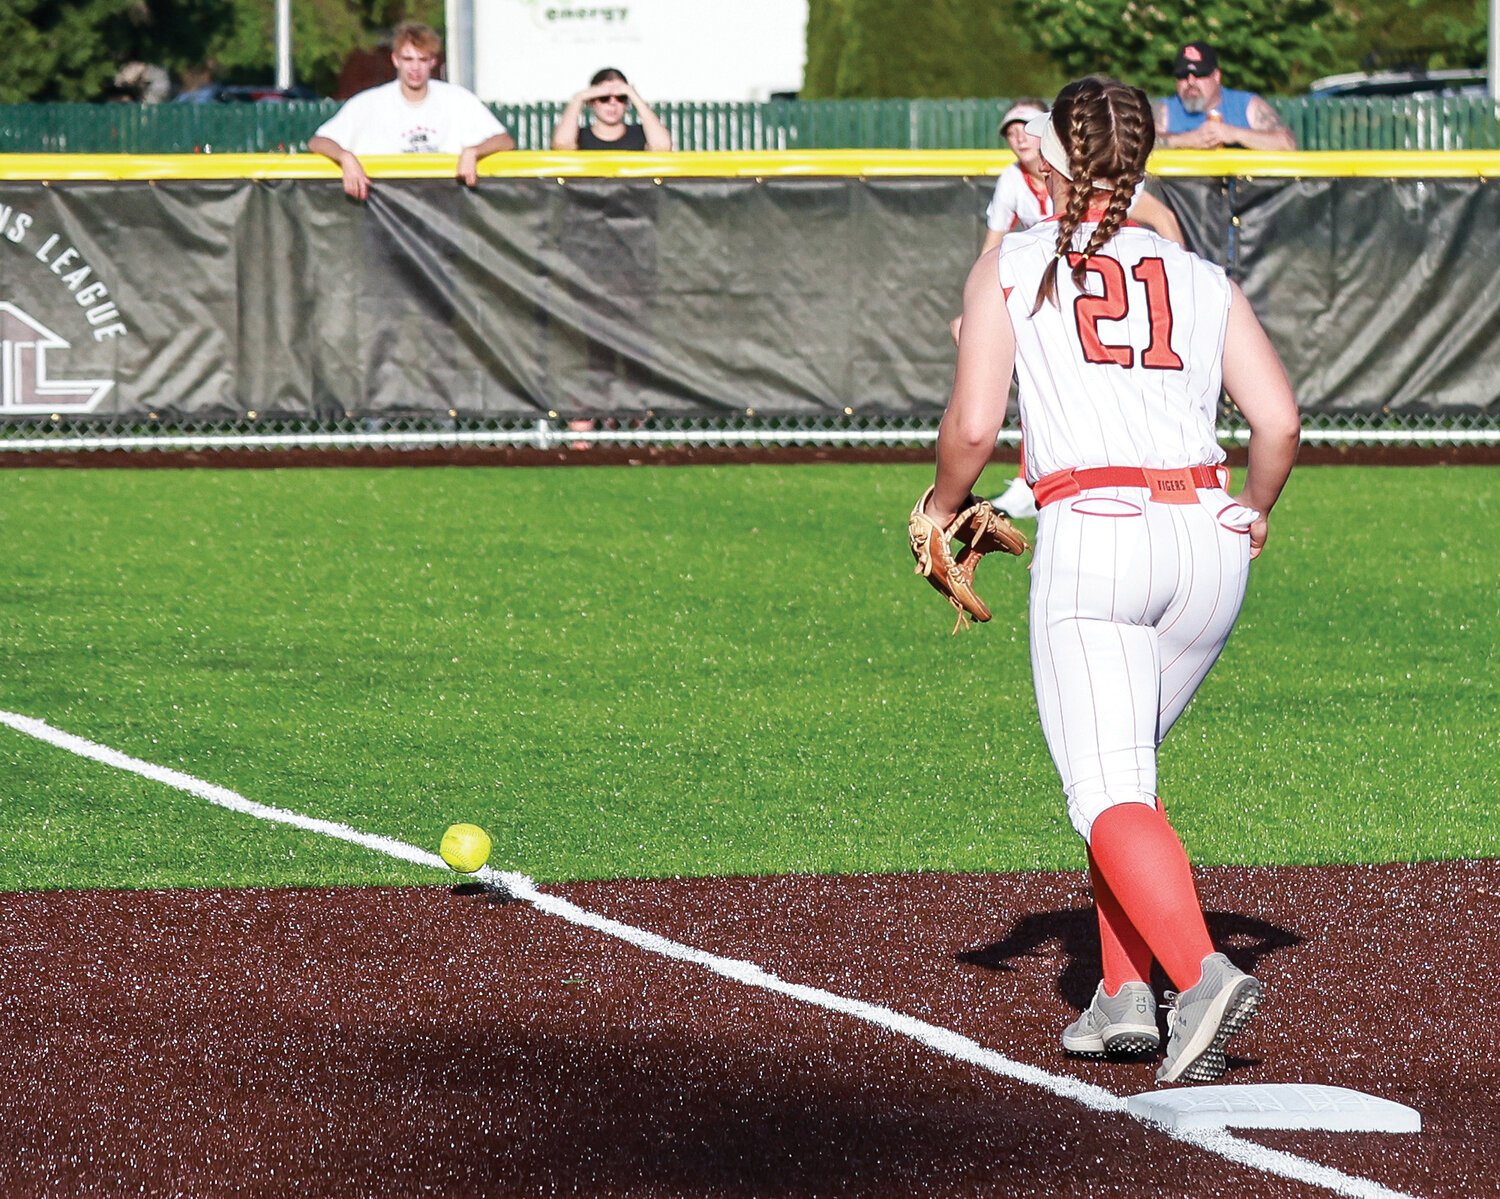 A pivitol moment in the game as a ball hit by Union is about to land just foul over the head of Battle Ground's third basemen Brooke Rausch on Tuesday, May 16.